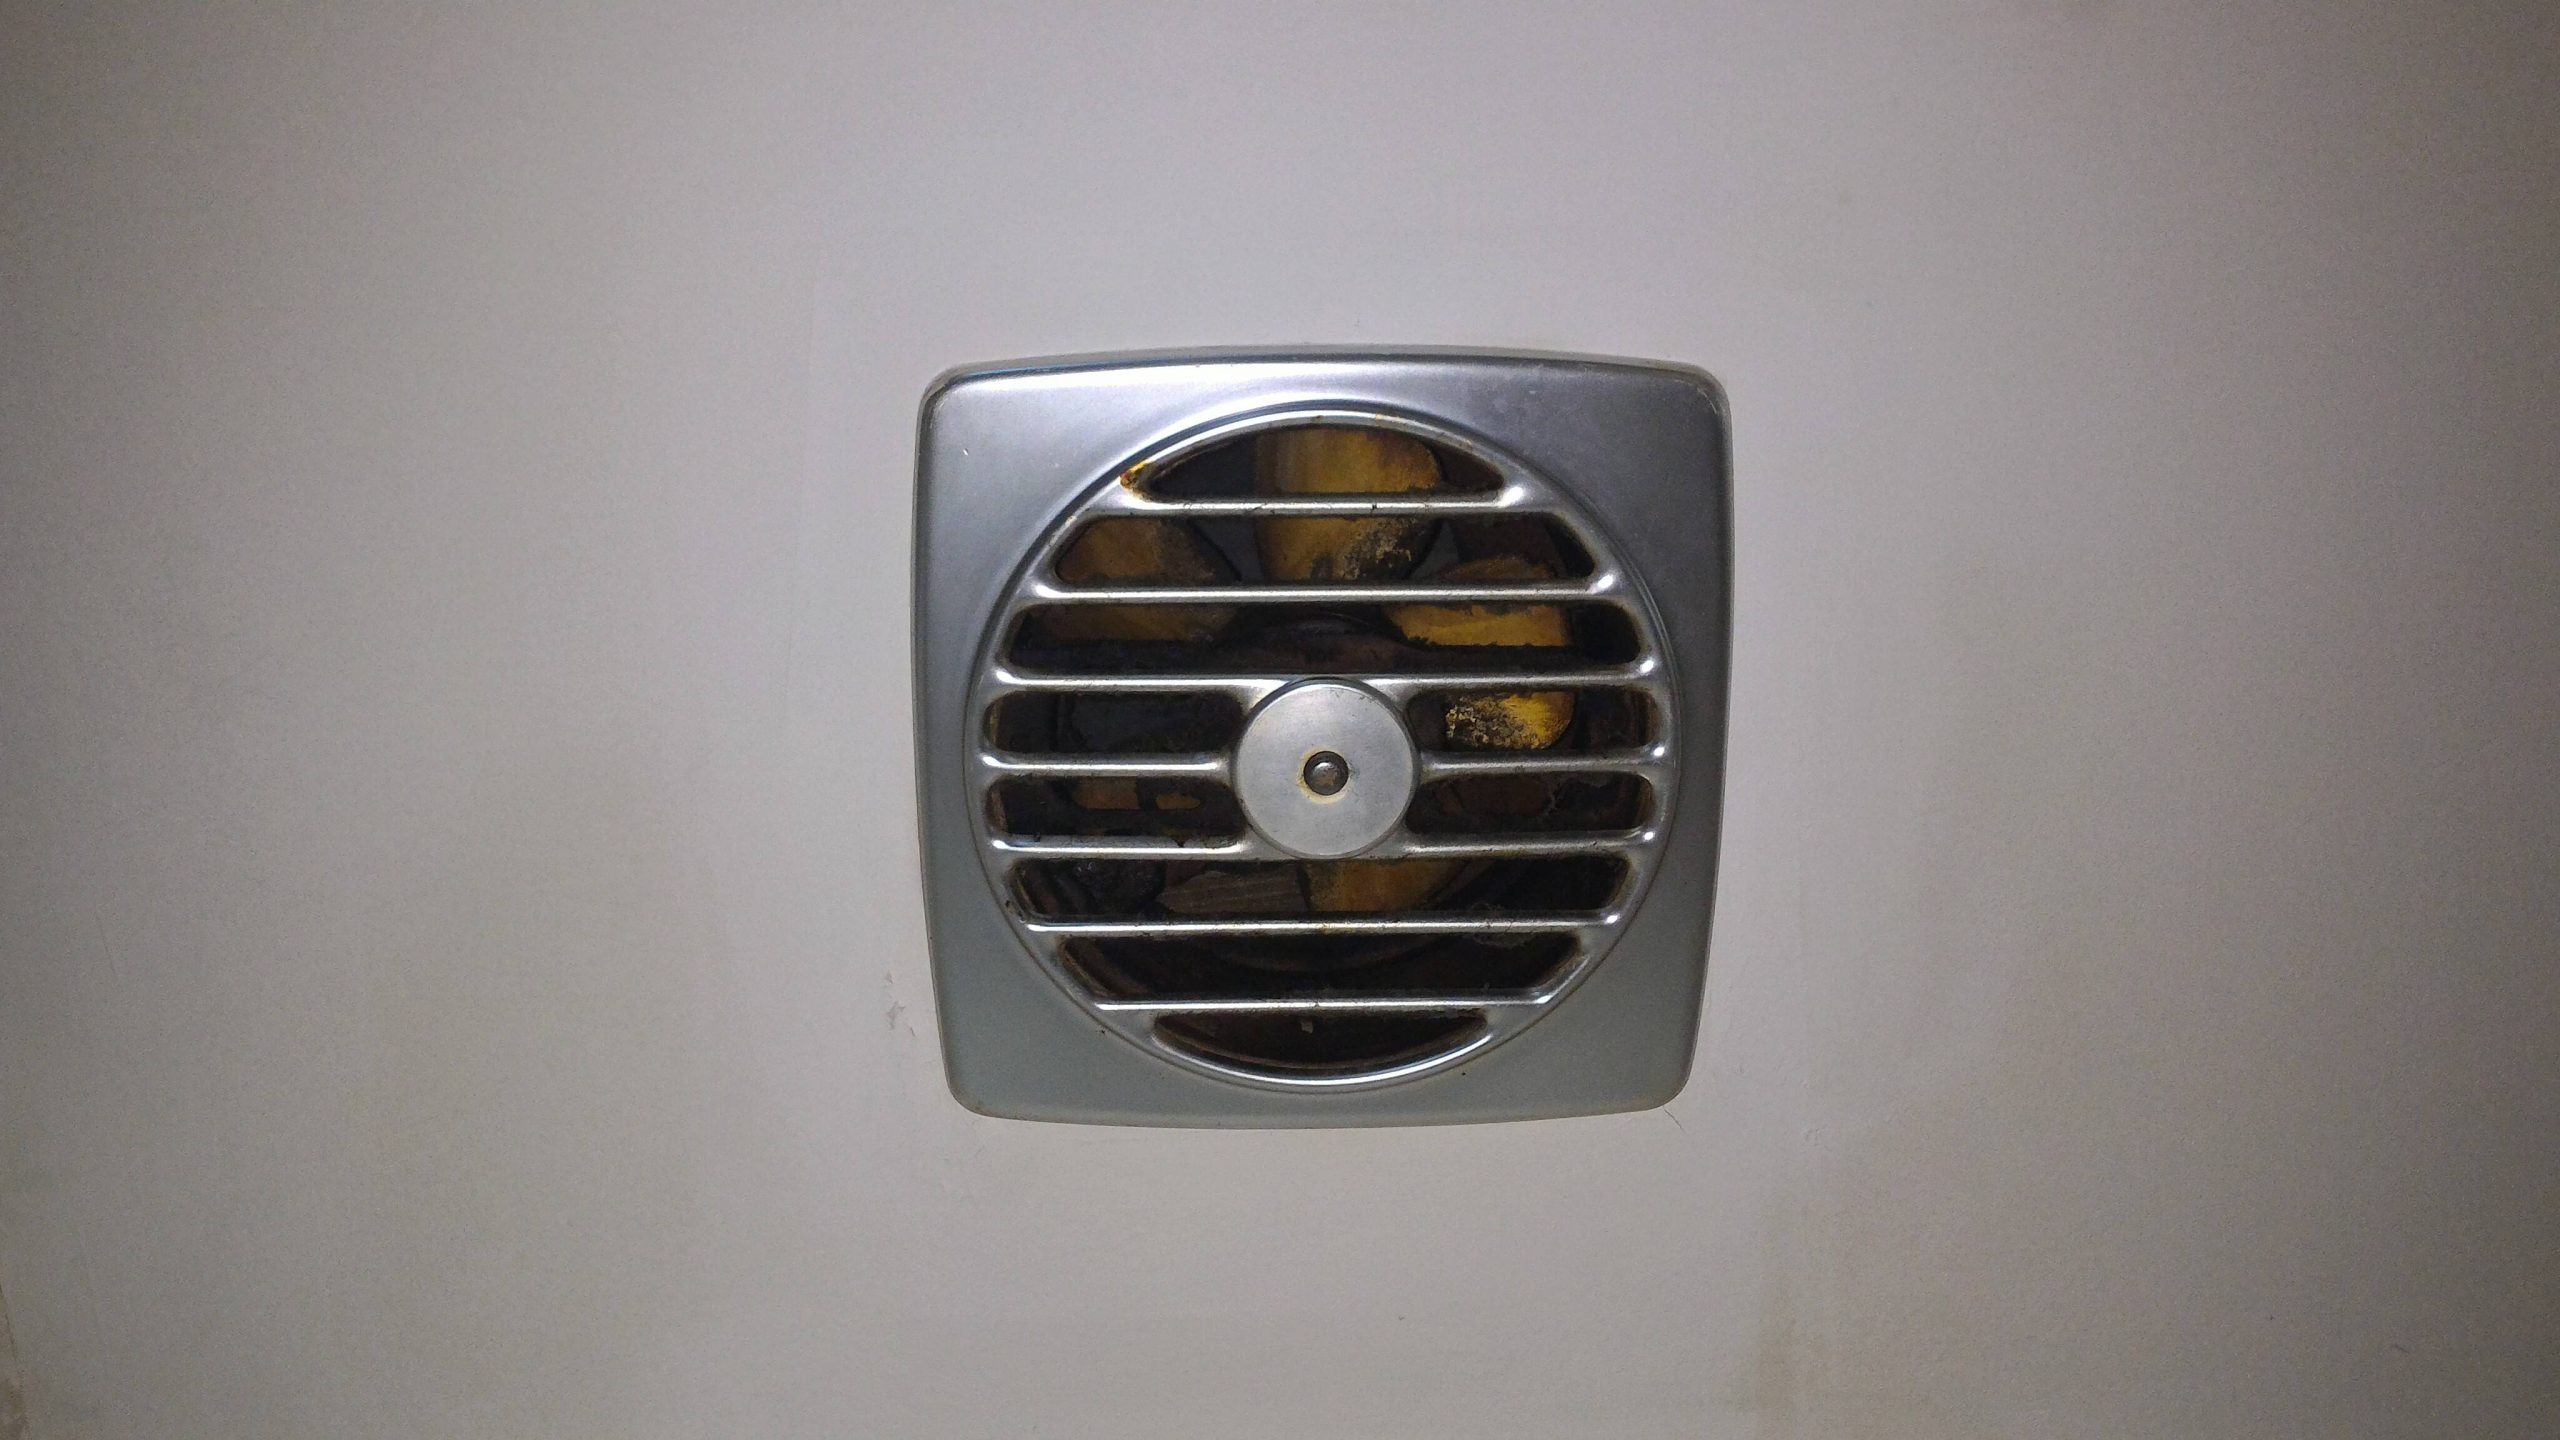 Ceiling Exhaust Fan In Kitchen Home Improvement Stack Exchange for sizing 4096 X 2304